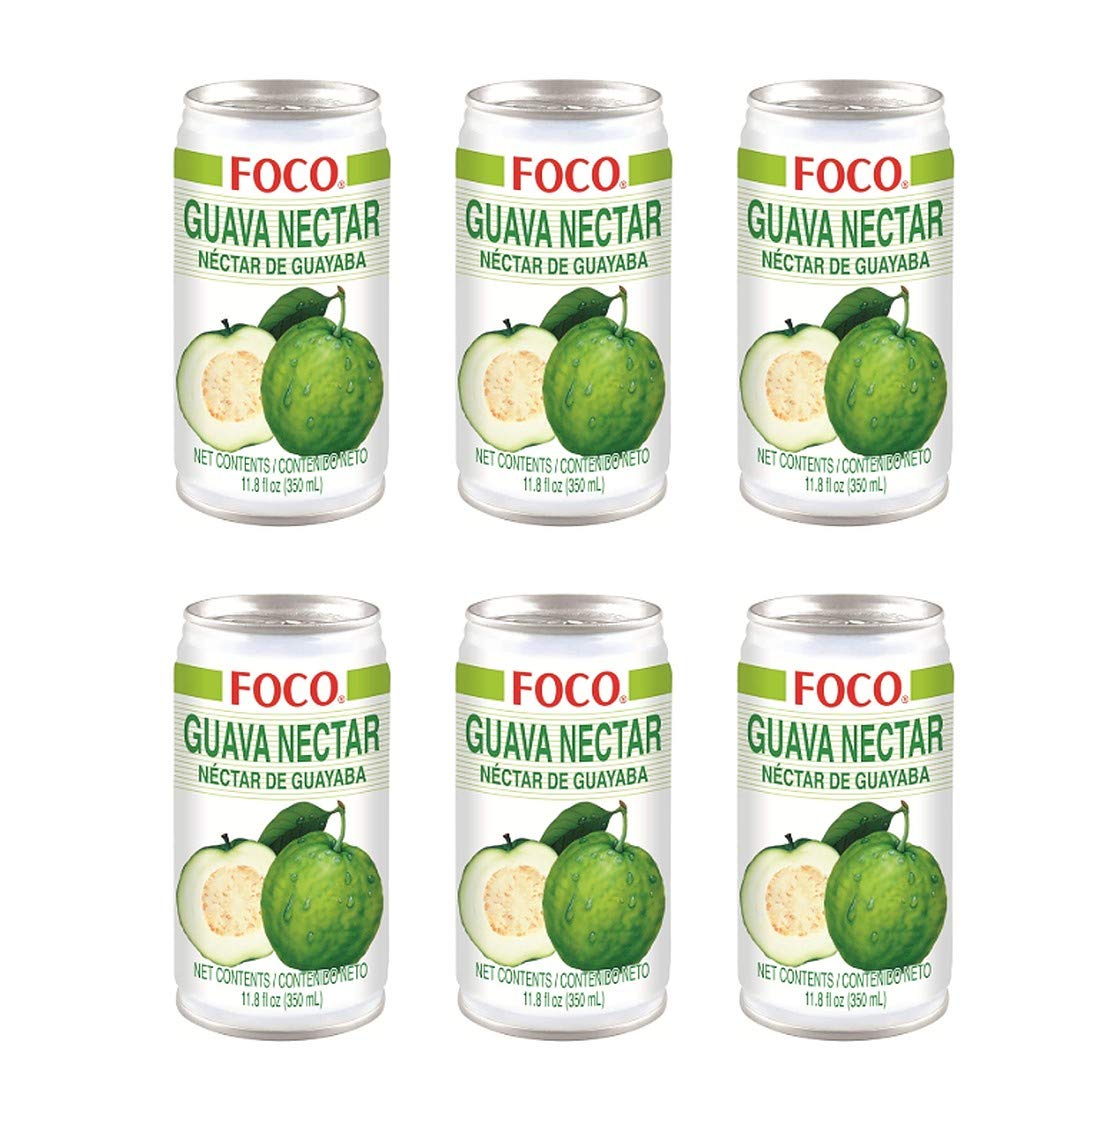 Foco Guava Nectar 11.8oz, Pack of 6 Cans